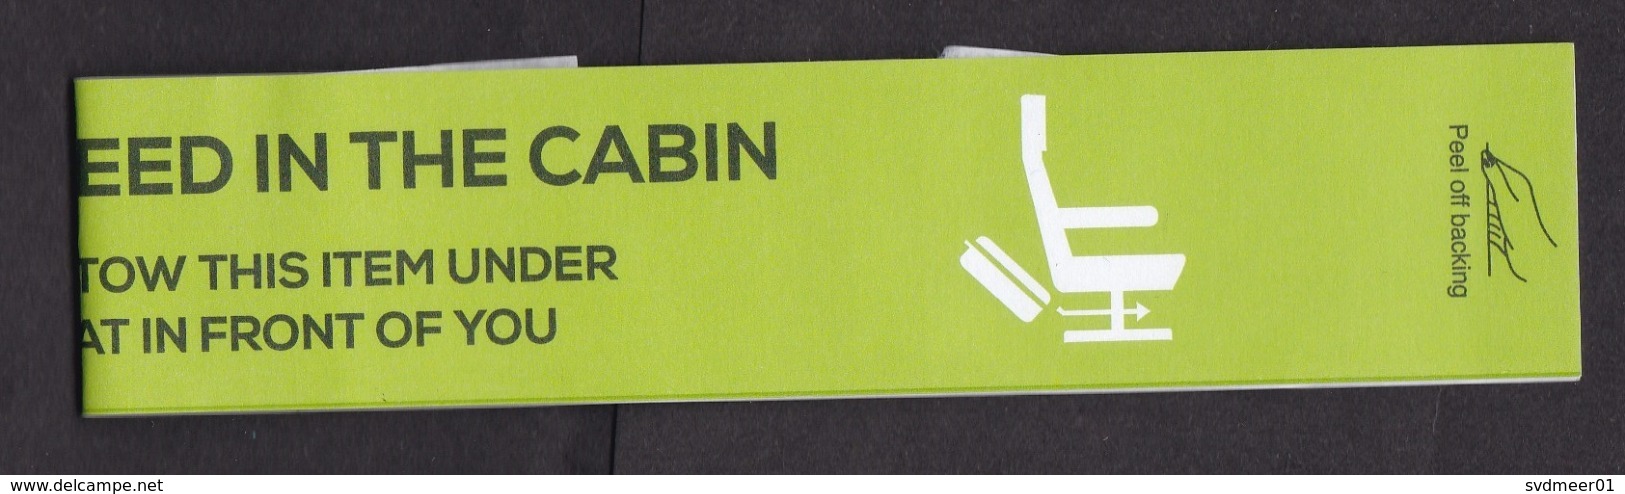 Transavia Airlines, Netherlands: Luggage Label, Baggage Tag, Cabin Baggage, Aviation (traces Of Use) - Baggage Labels & Tags